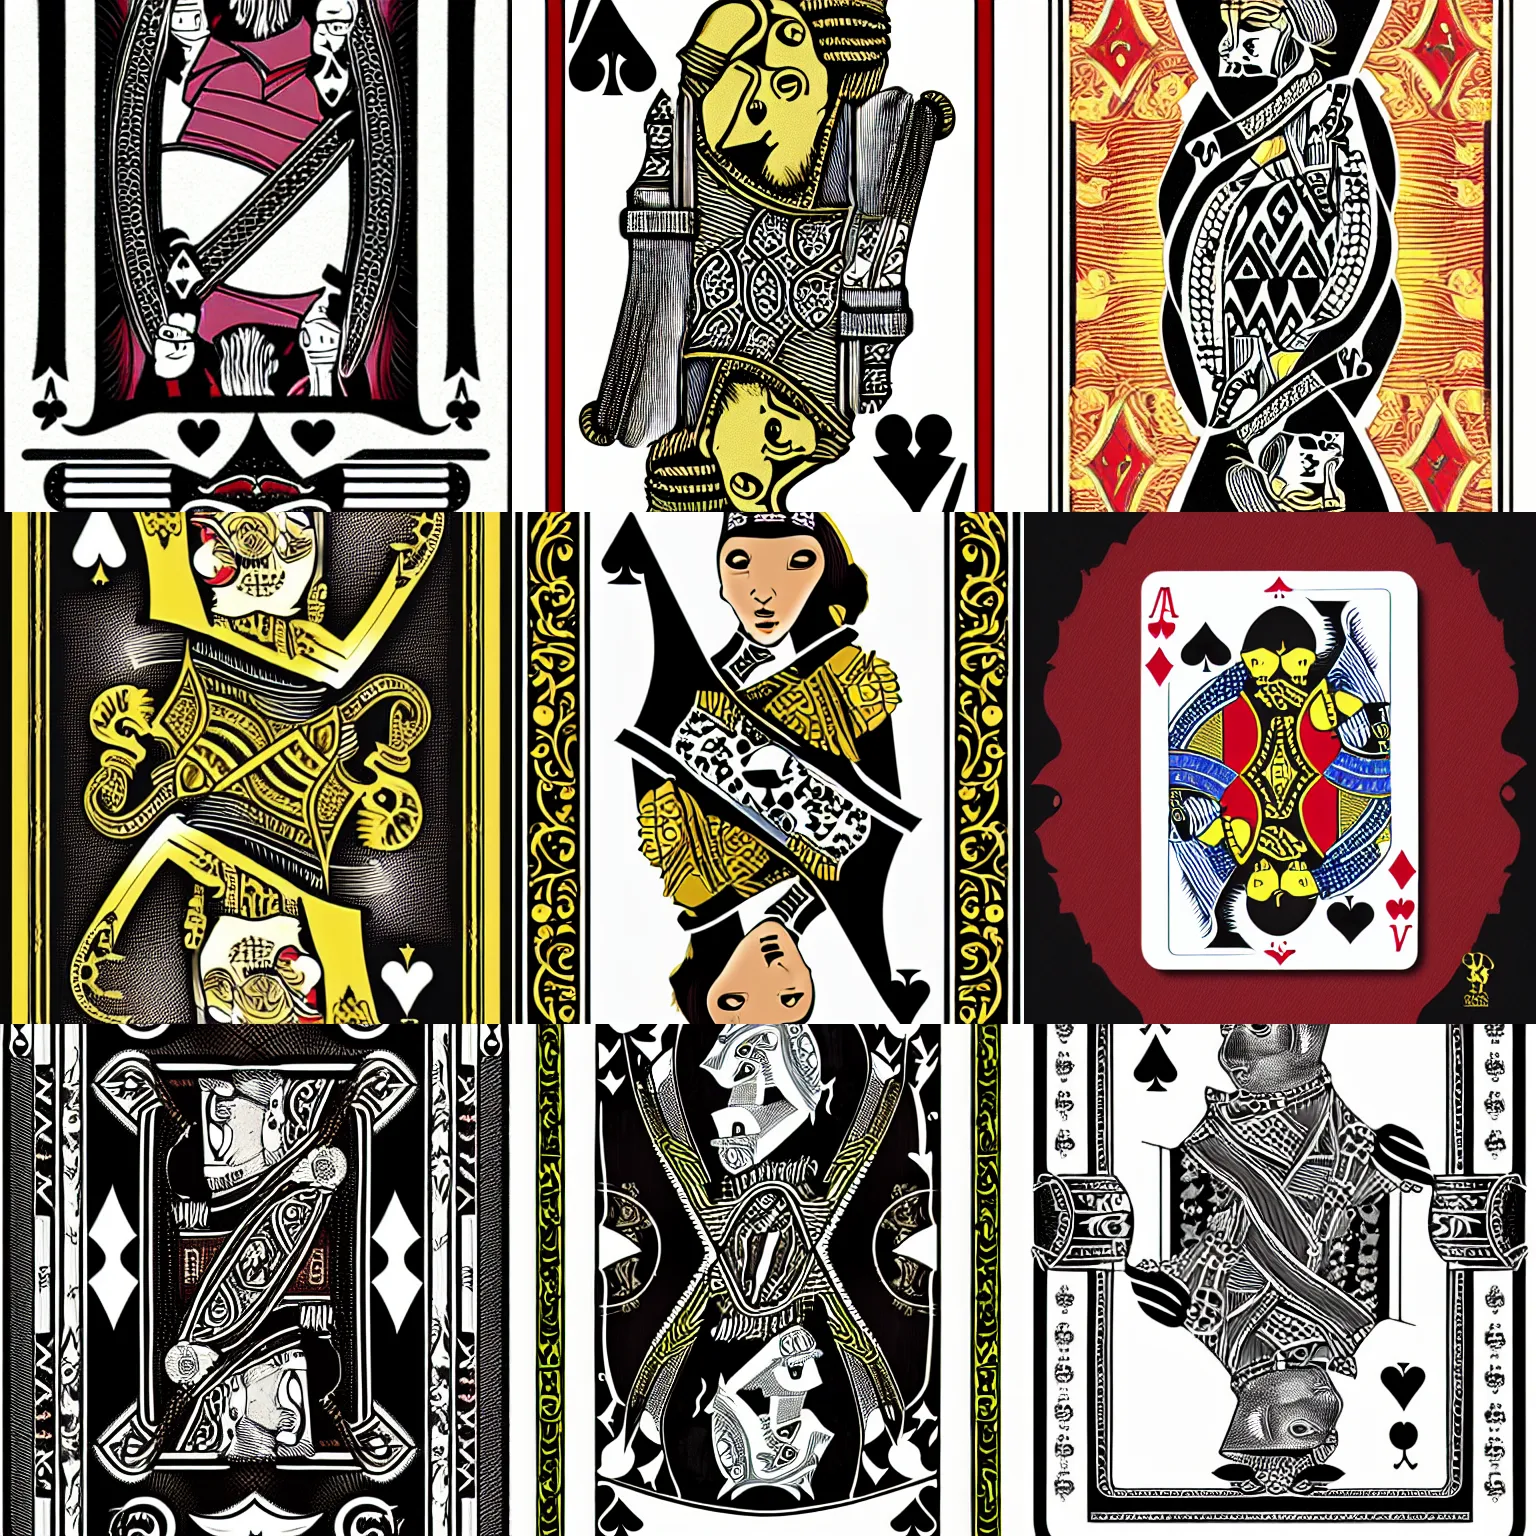 Prompt: playing card design of an ace of spades including a weasel